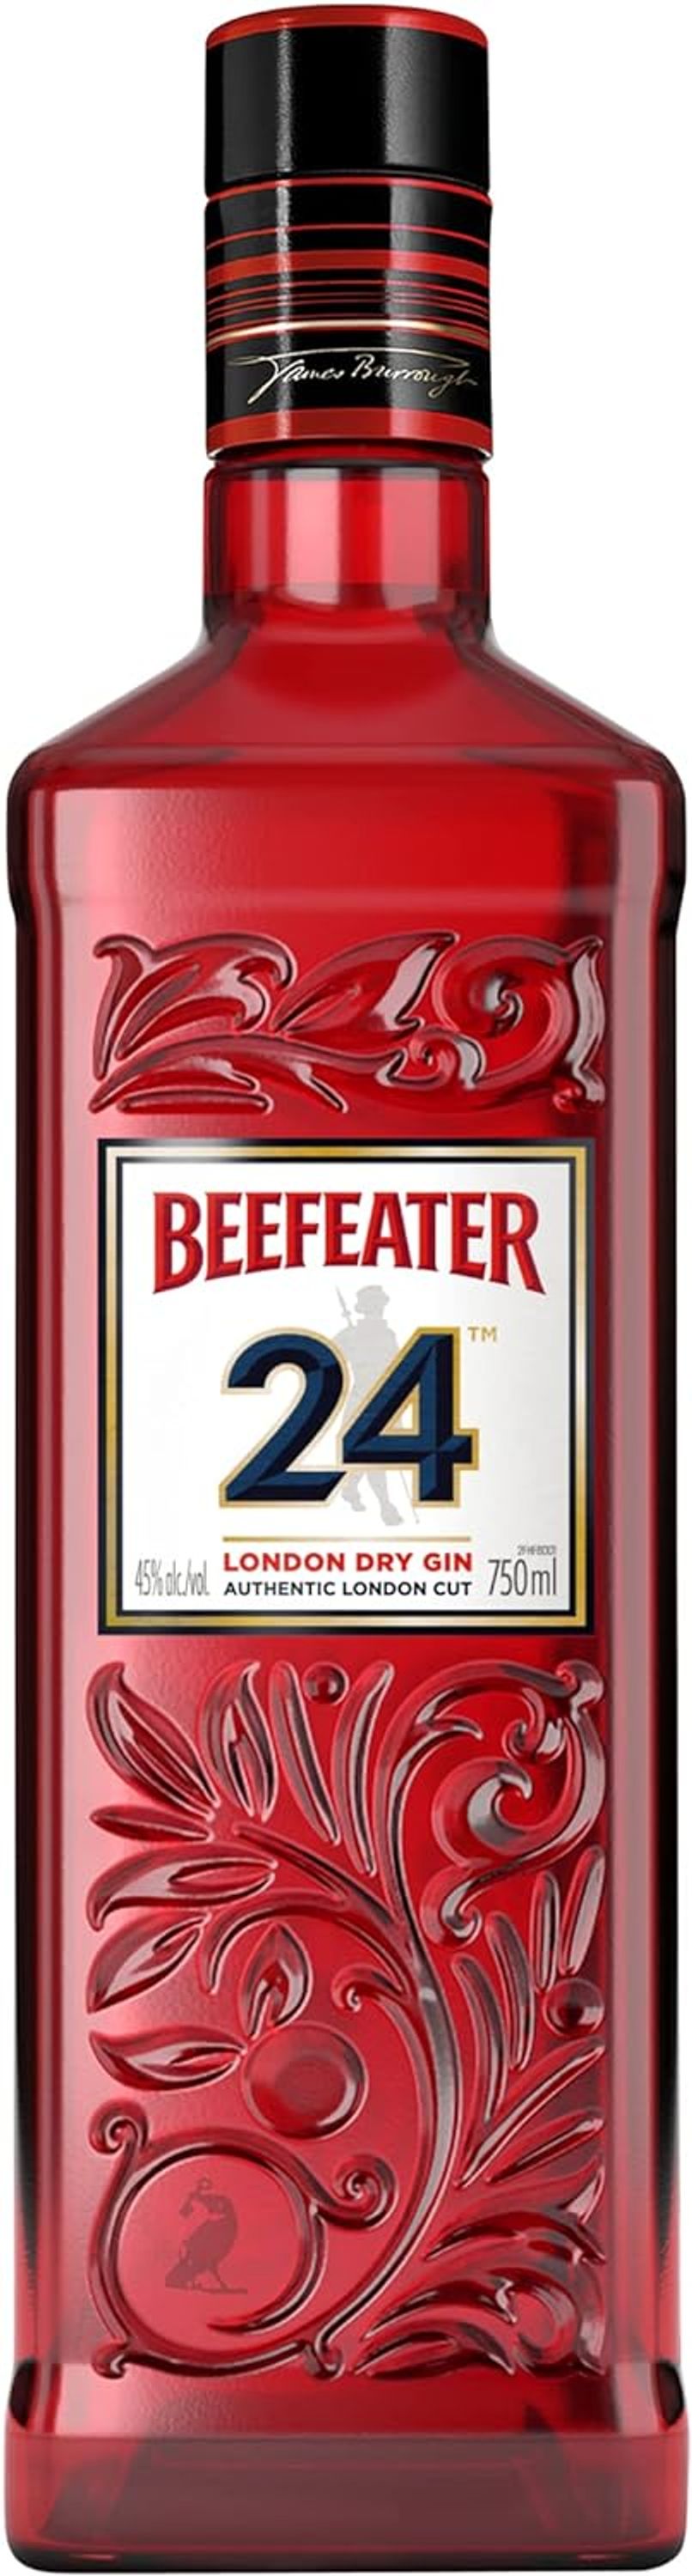 Beefeater 24 London Dry Gin 0.7l, alc. 45 Vol.-%